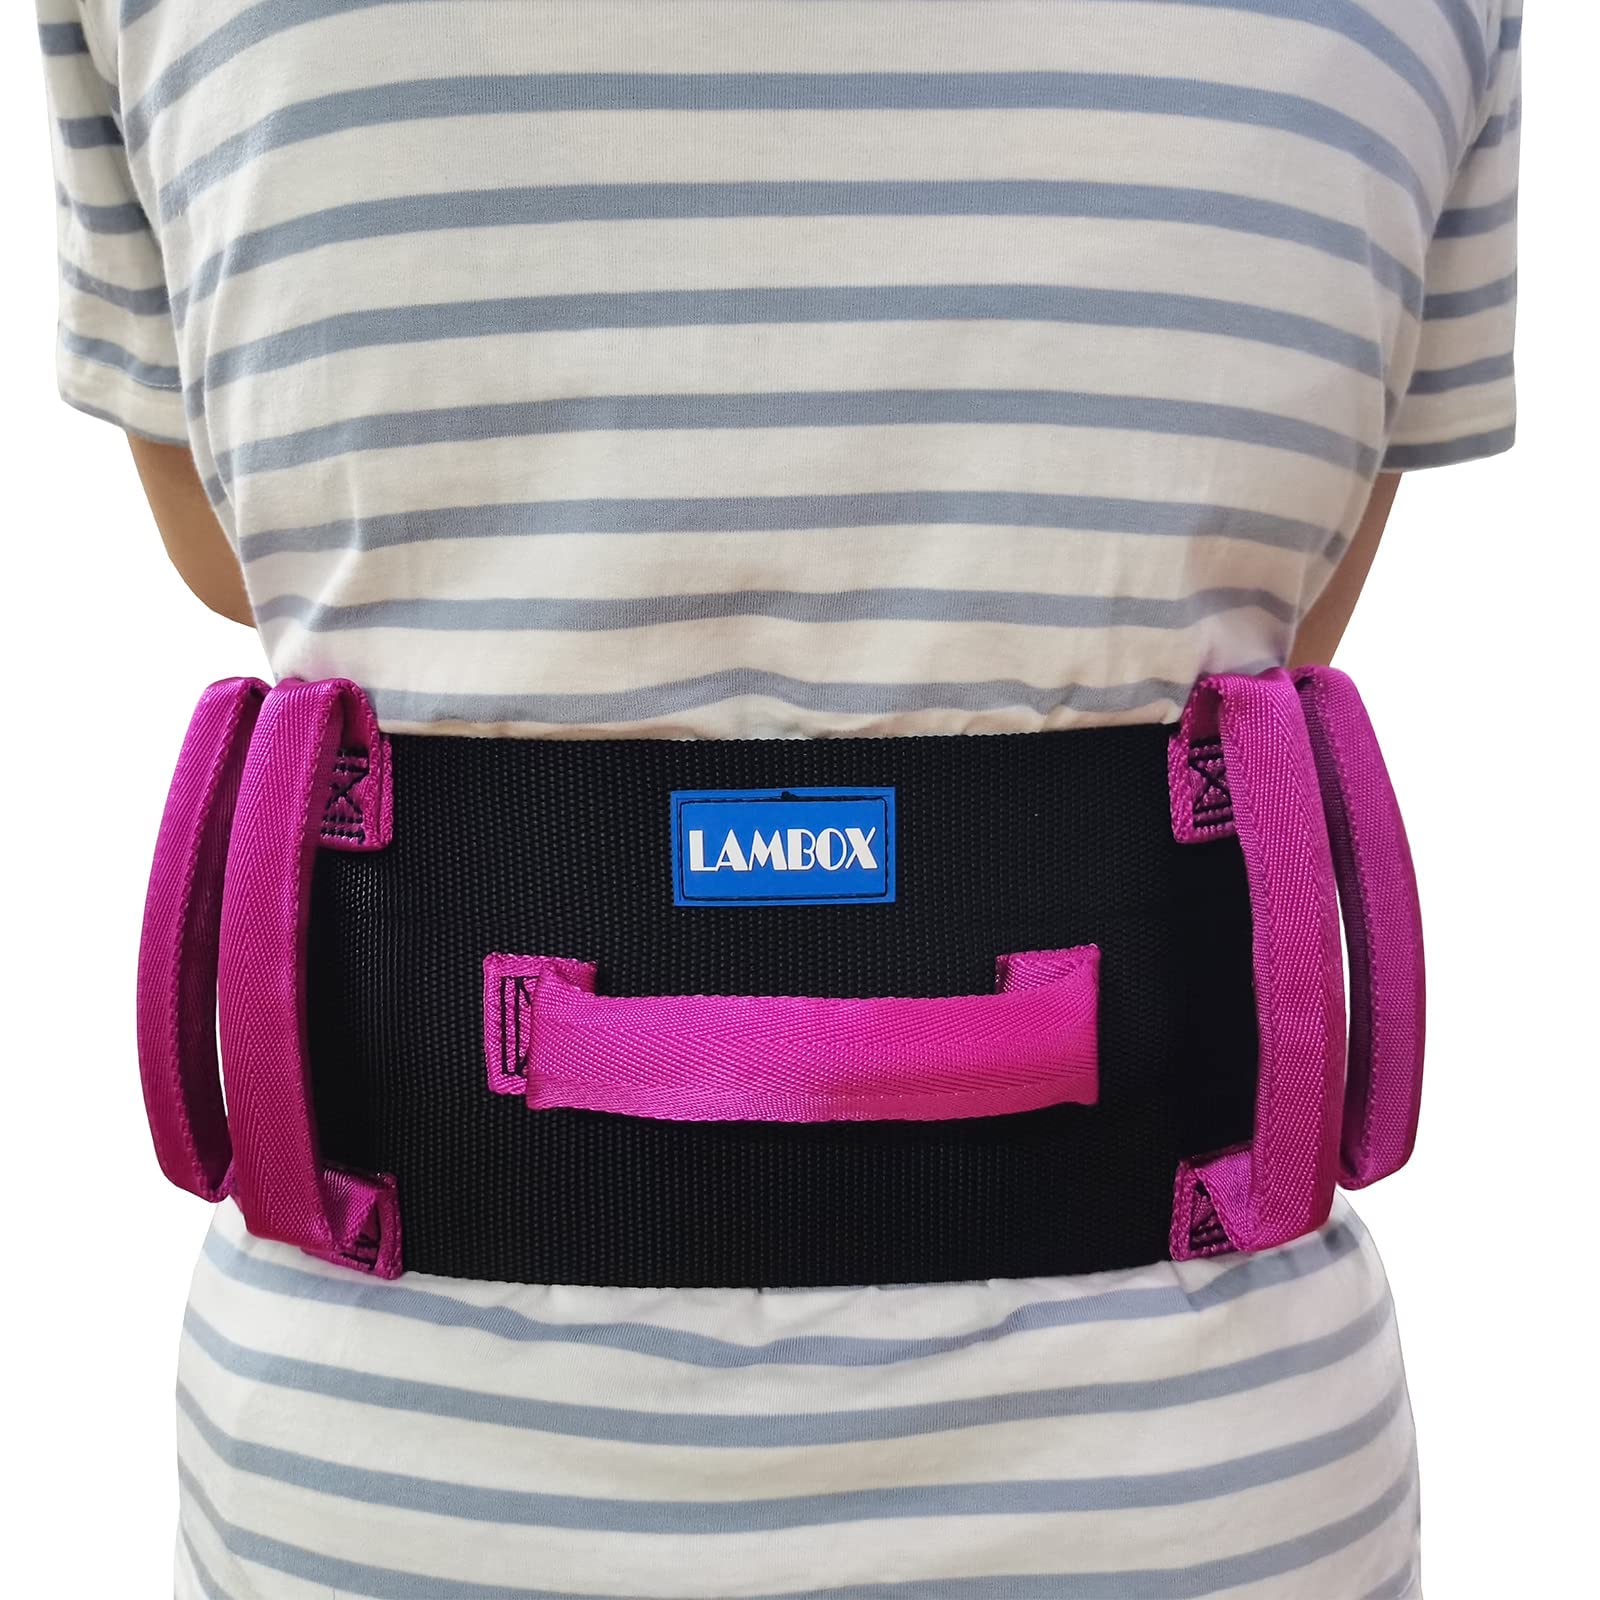 LAMBOX Transfer Walking Gait Belt with 7 Nylon Padded Handles-Medical  Nursing Safety Gait Assist Device for Elderly, Seniors, Therapy (Rose Red,  60 inch) Rose Red 60 Inch